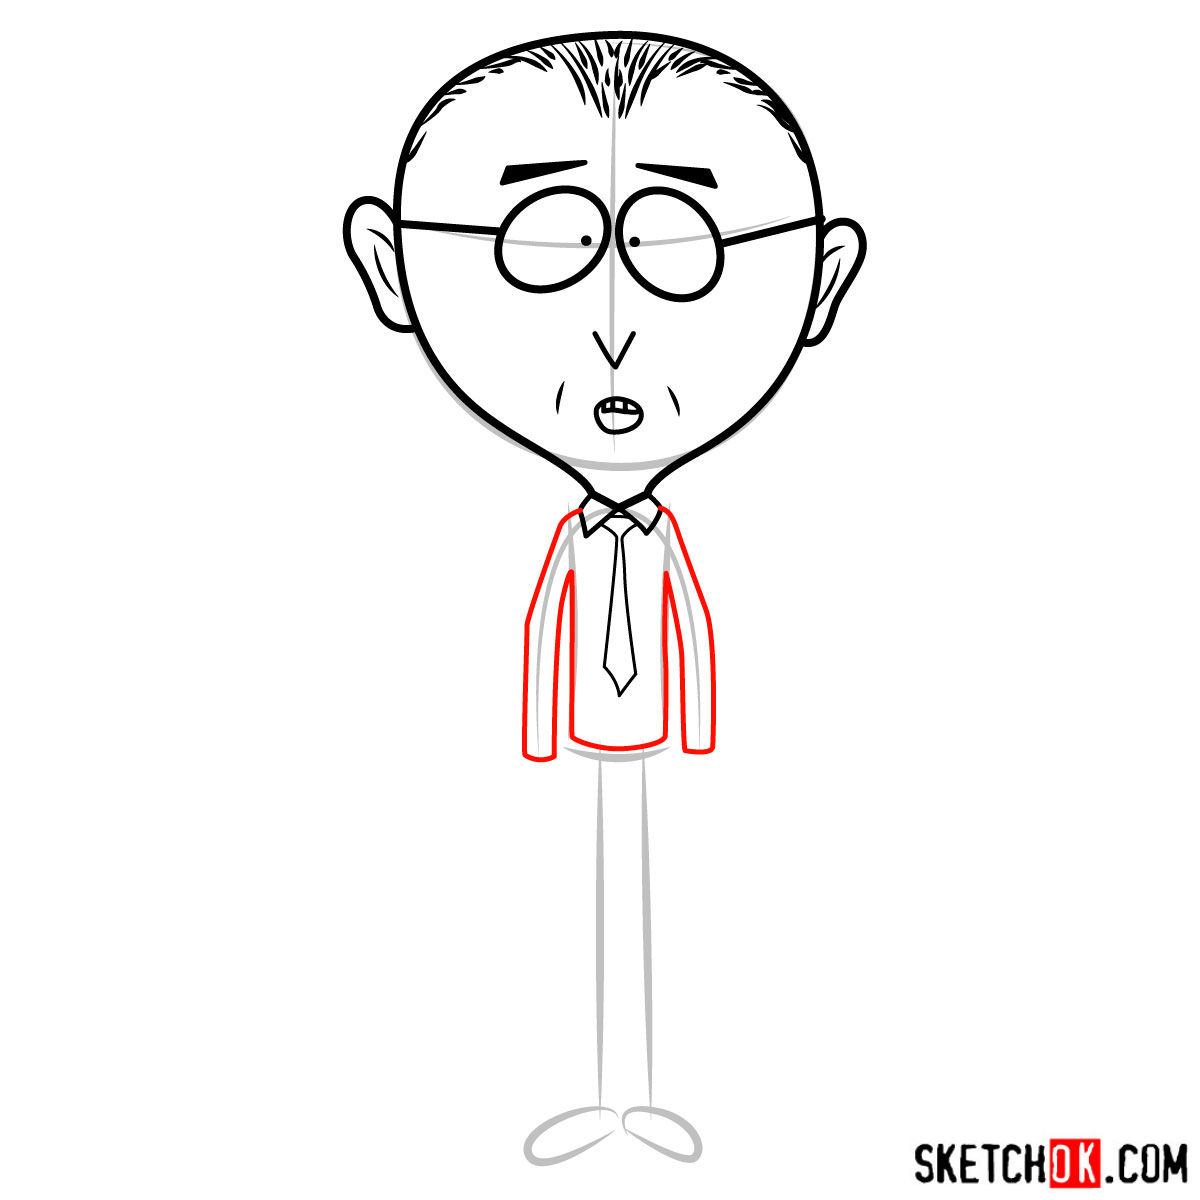 How to draw Mr. Mackey from South Park - step 05